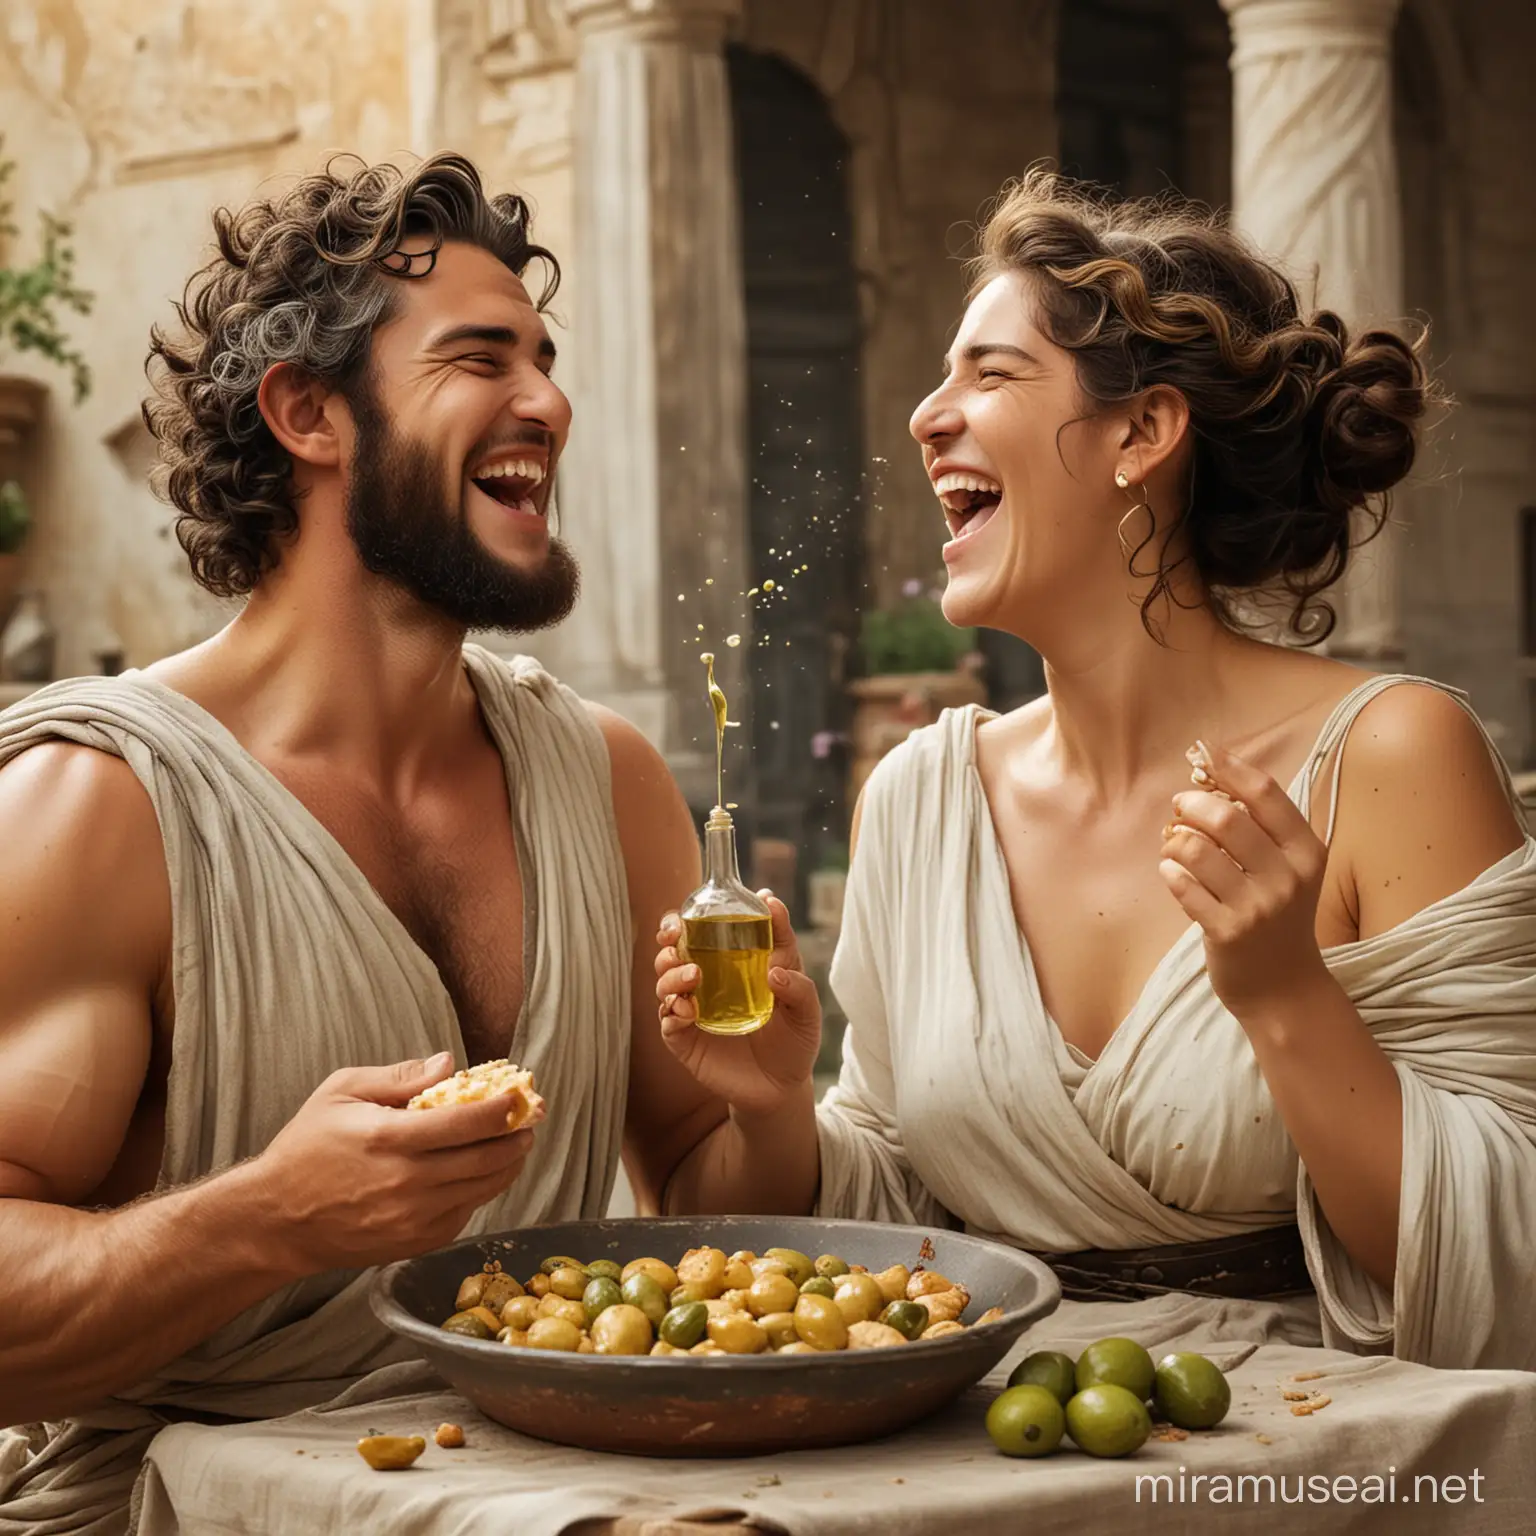 Zeus and Hera laughing with olive oil and food in their hands